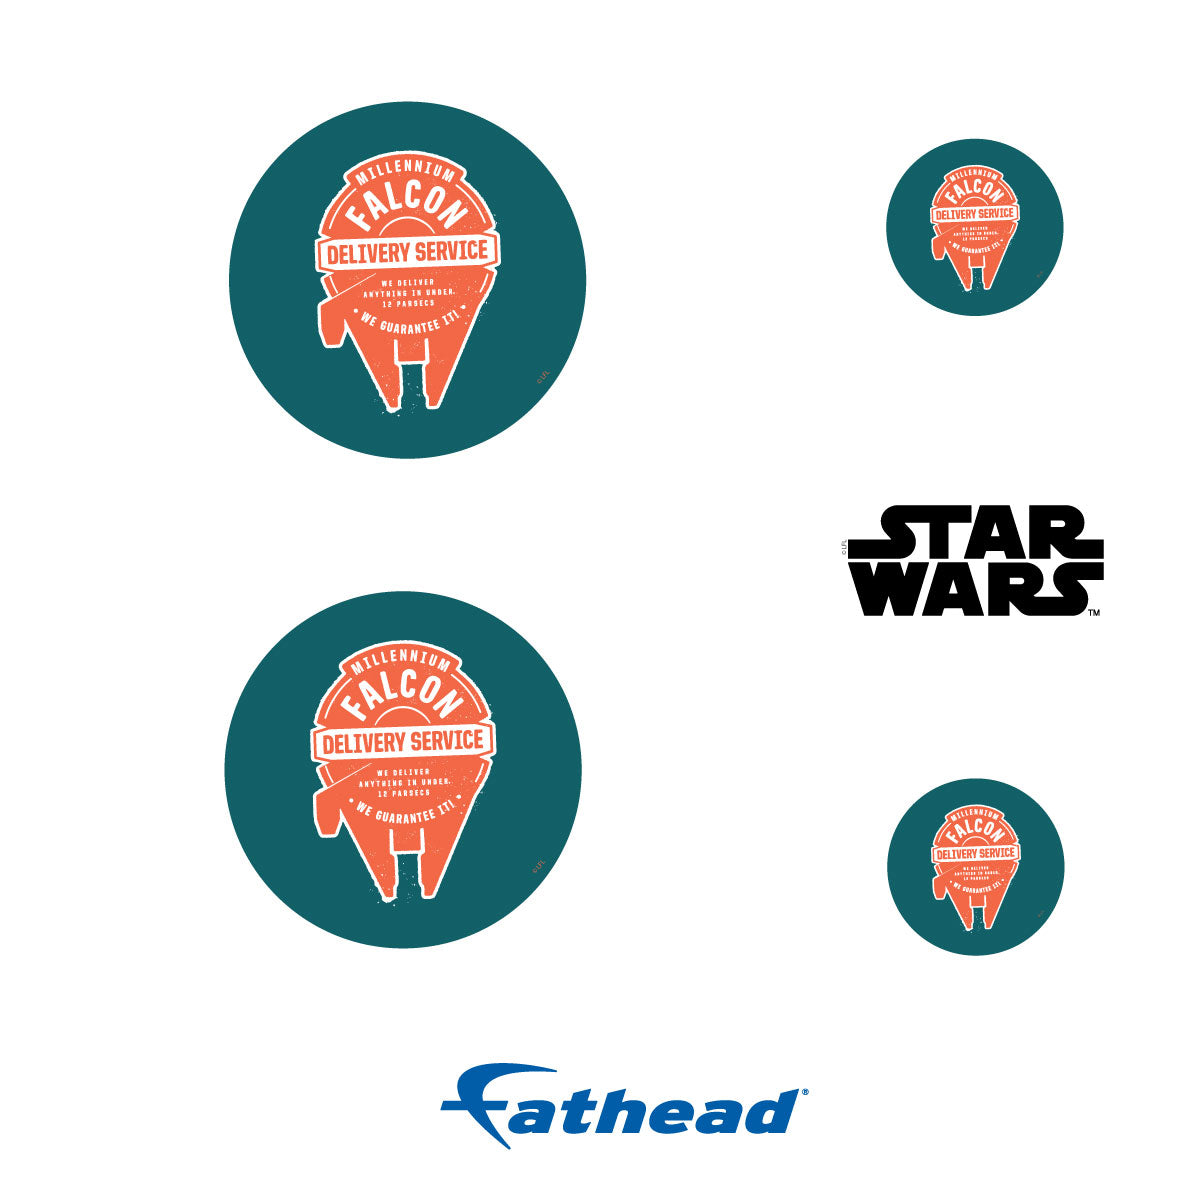 Millenium Falcon Delivery Service Minis        - Officially Licensed Star Wars Removable     Adhesive Decal